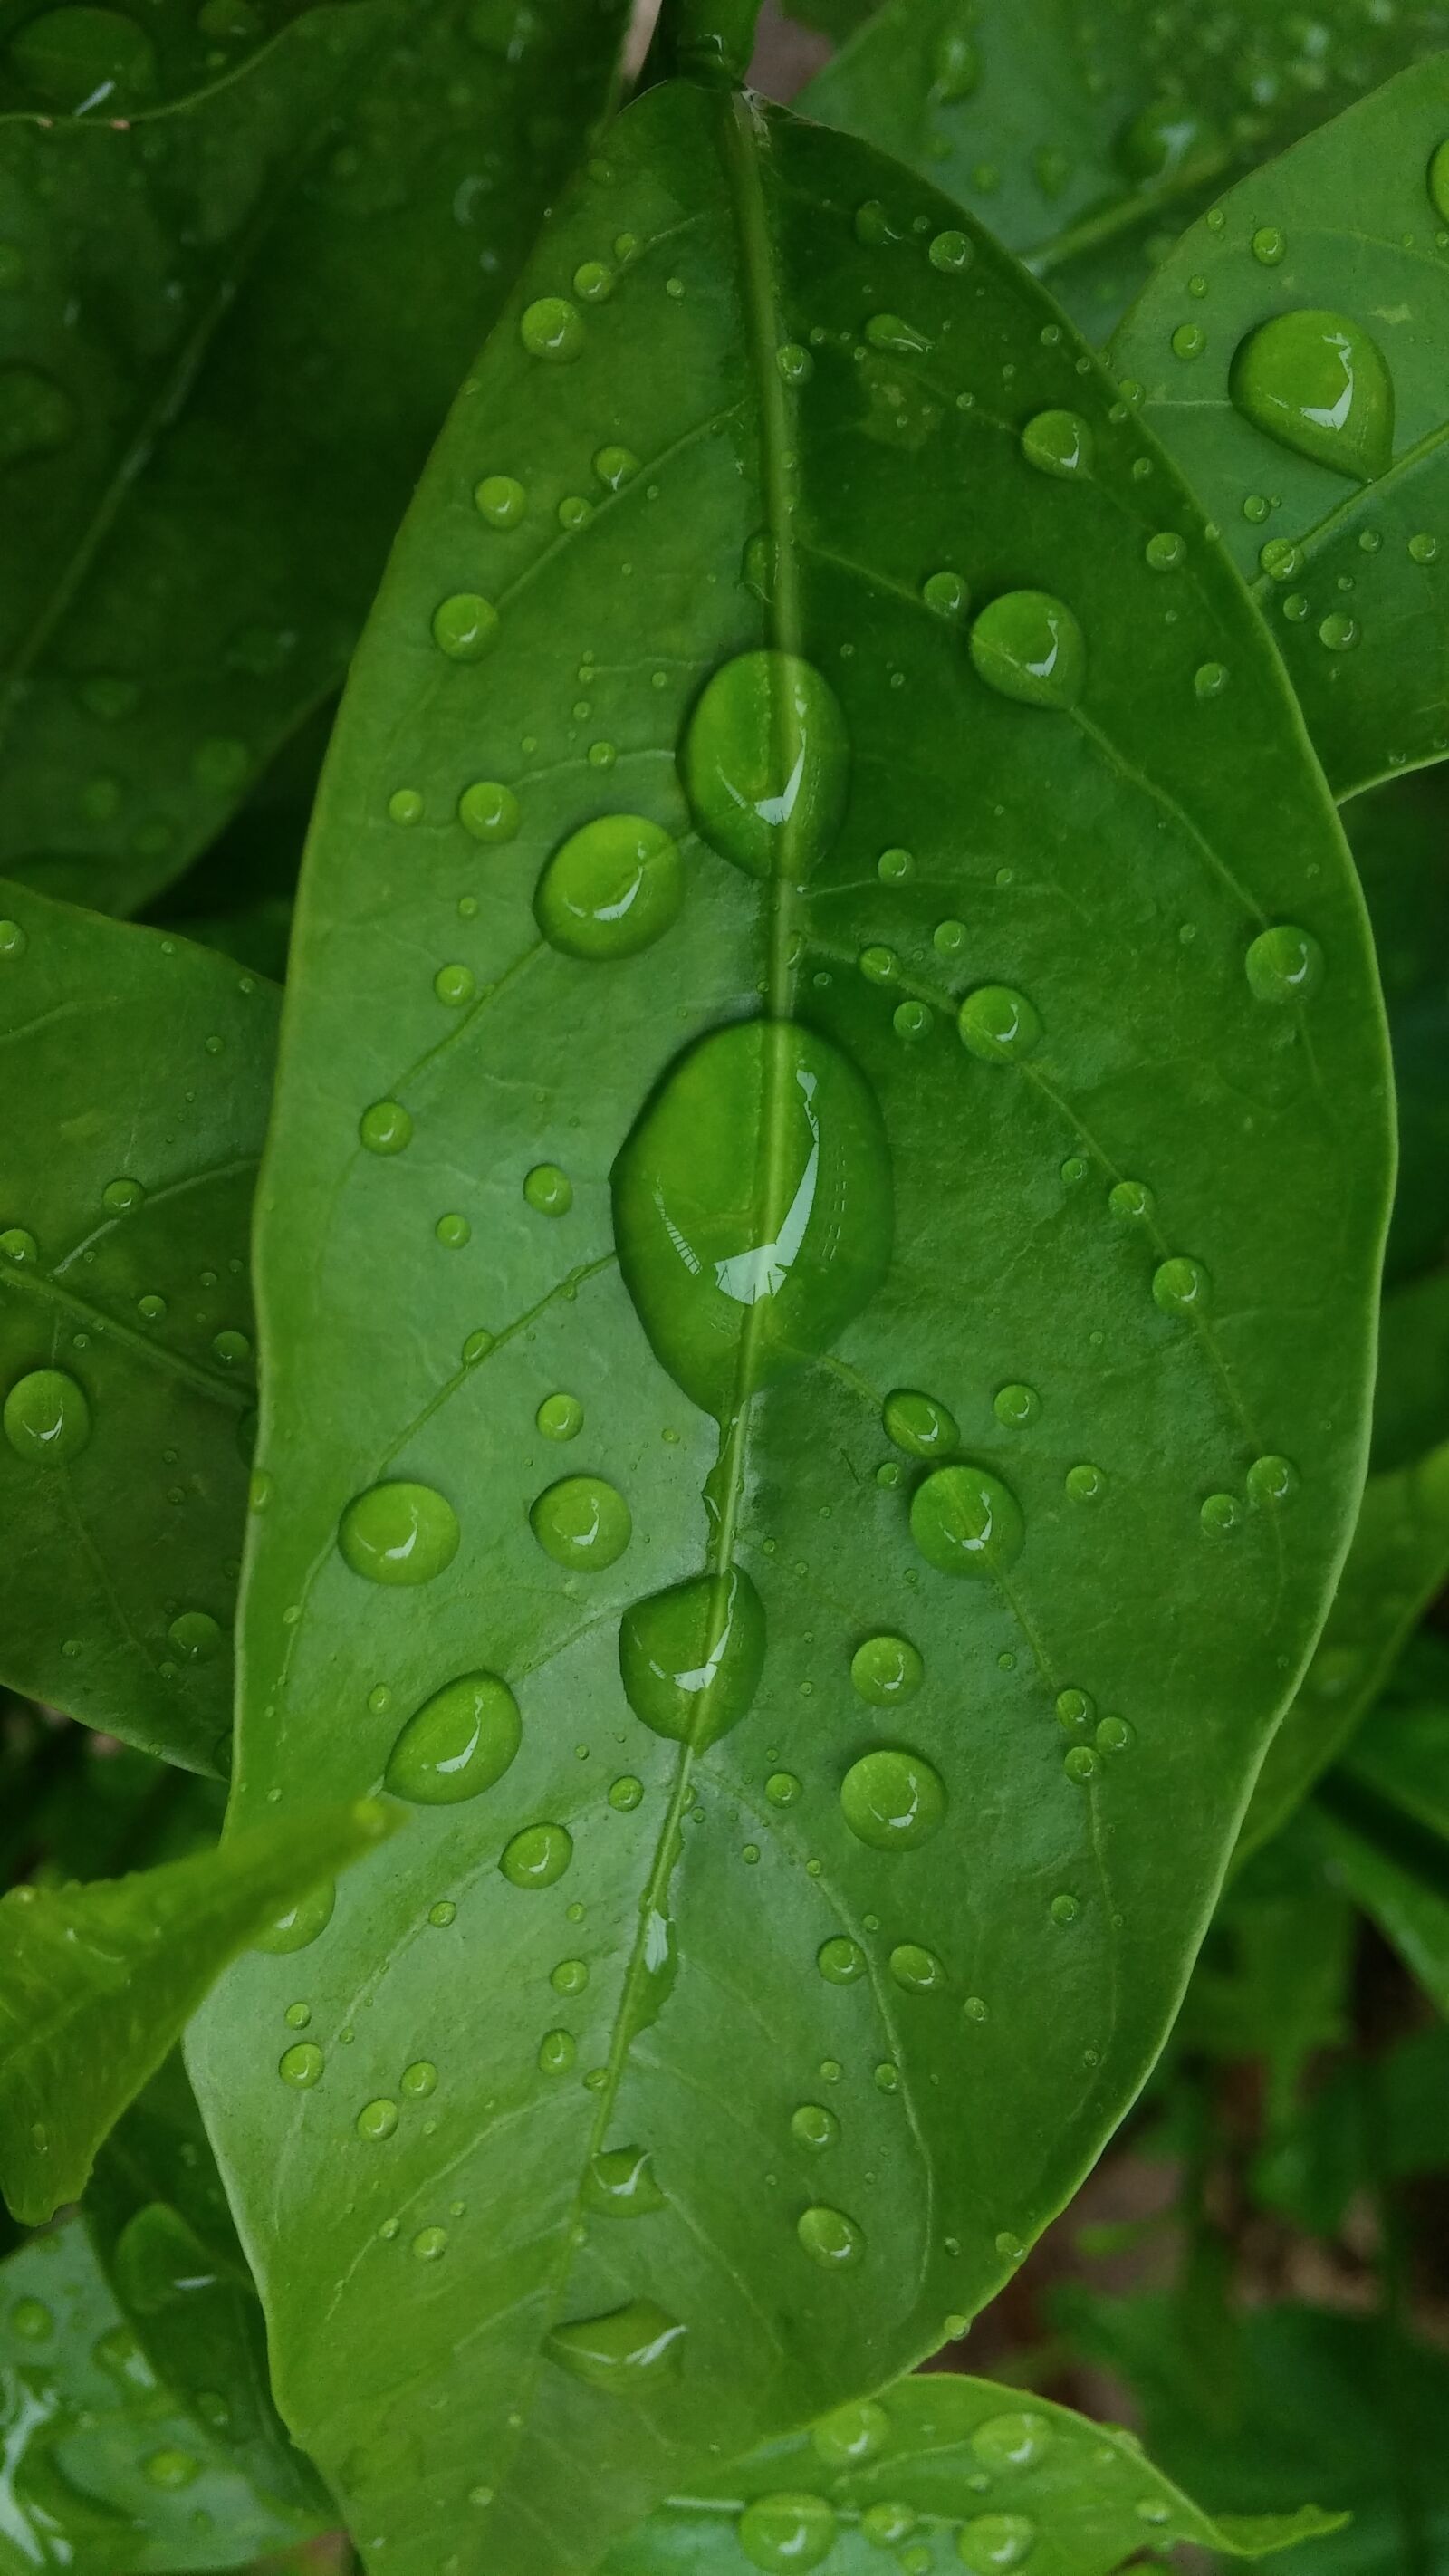 LG G2 sample photo. Leaves, abstract background, rain photography